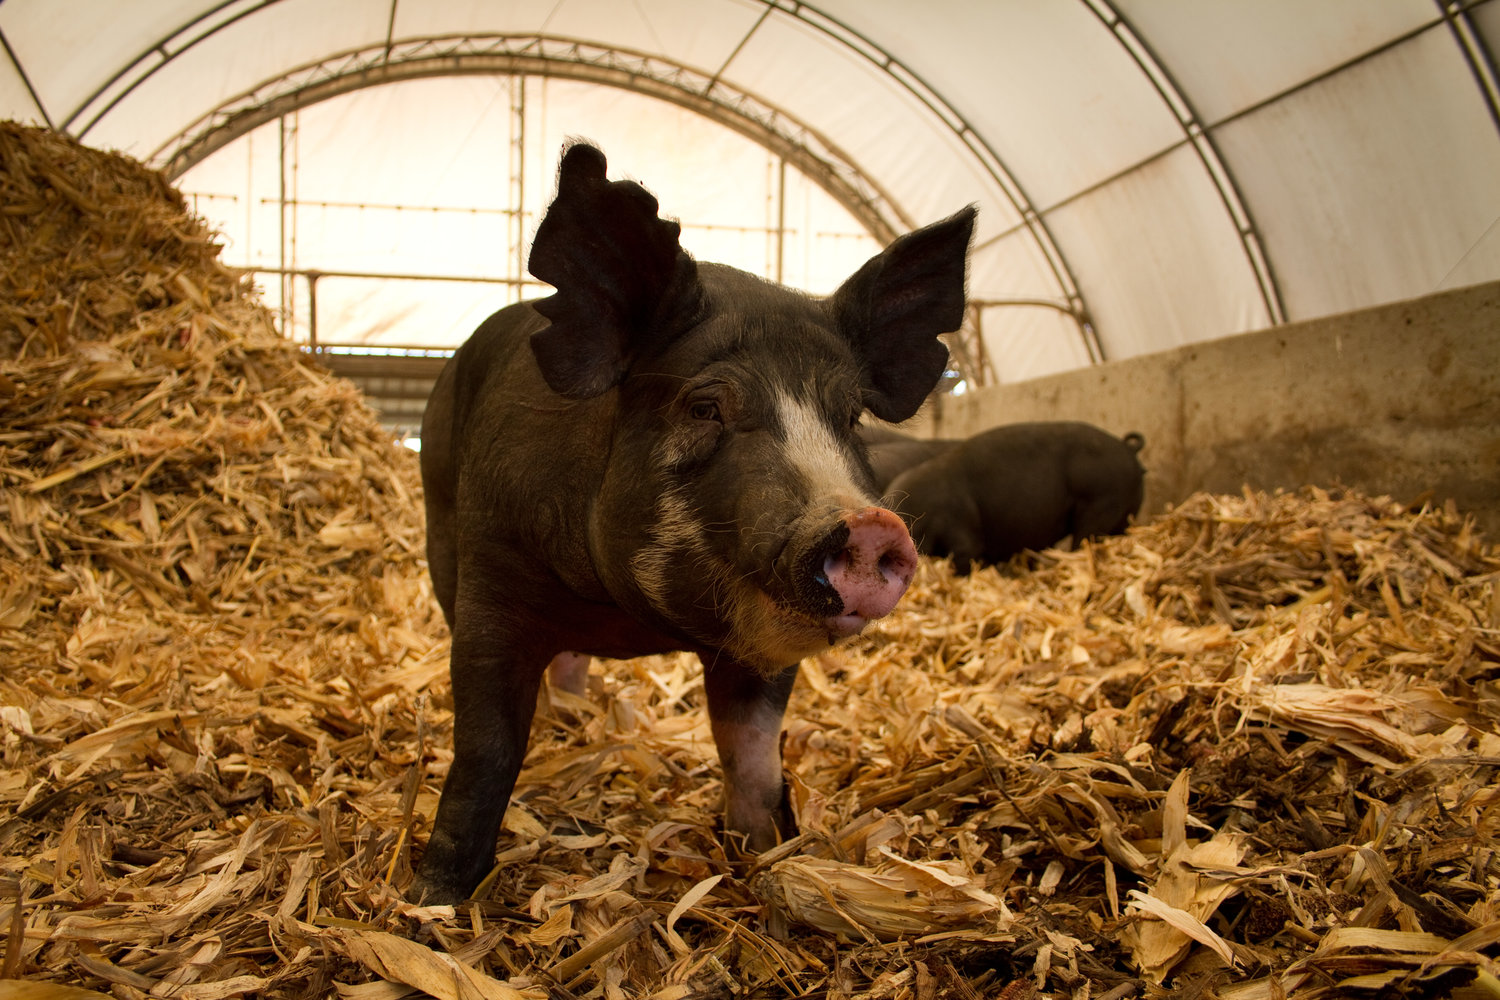 A Kurobuta Berkshire pig stands in a clean, open barn | Food Related | San Antonio TX